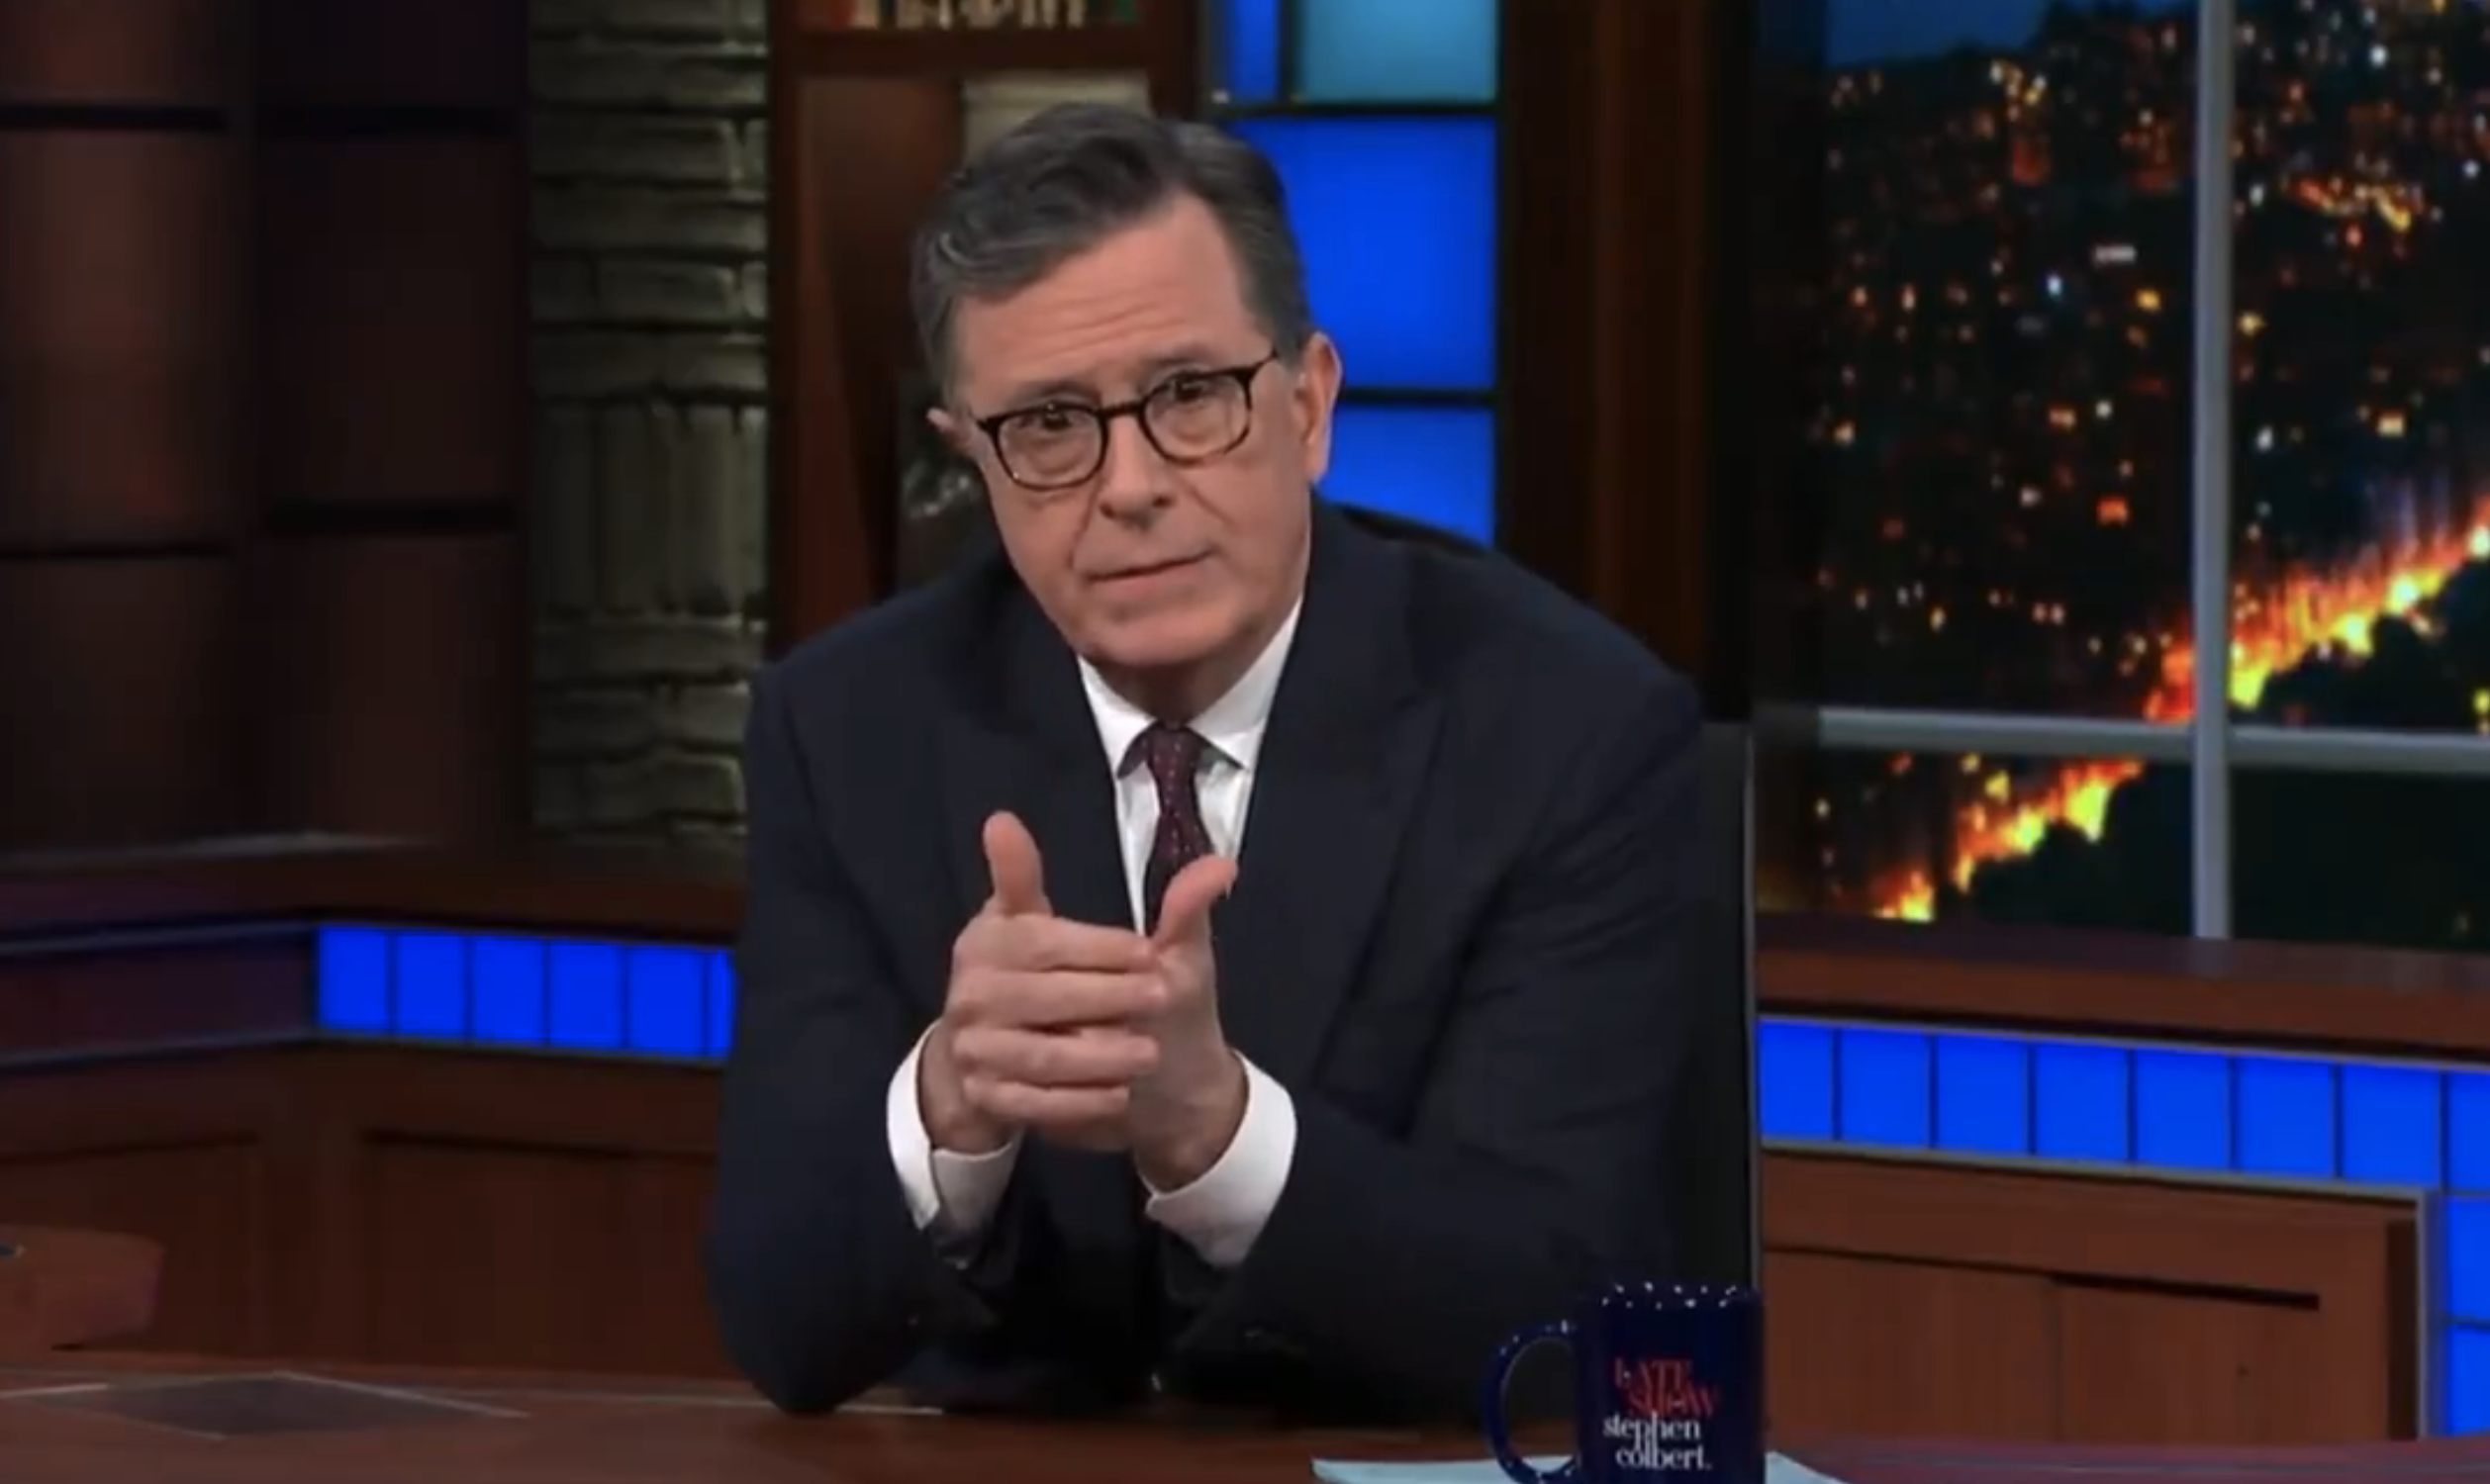 Stephen Colbert, wearing a suit, seated with hands together on his late-night show set